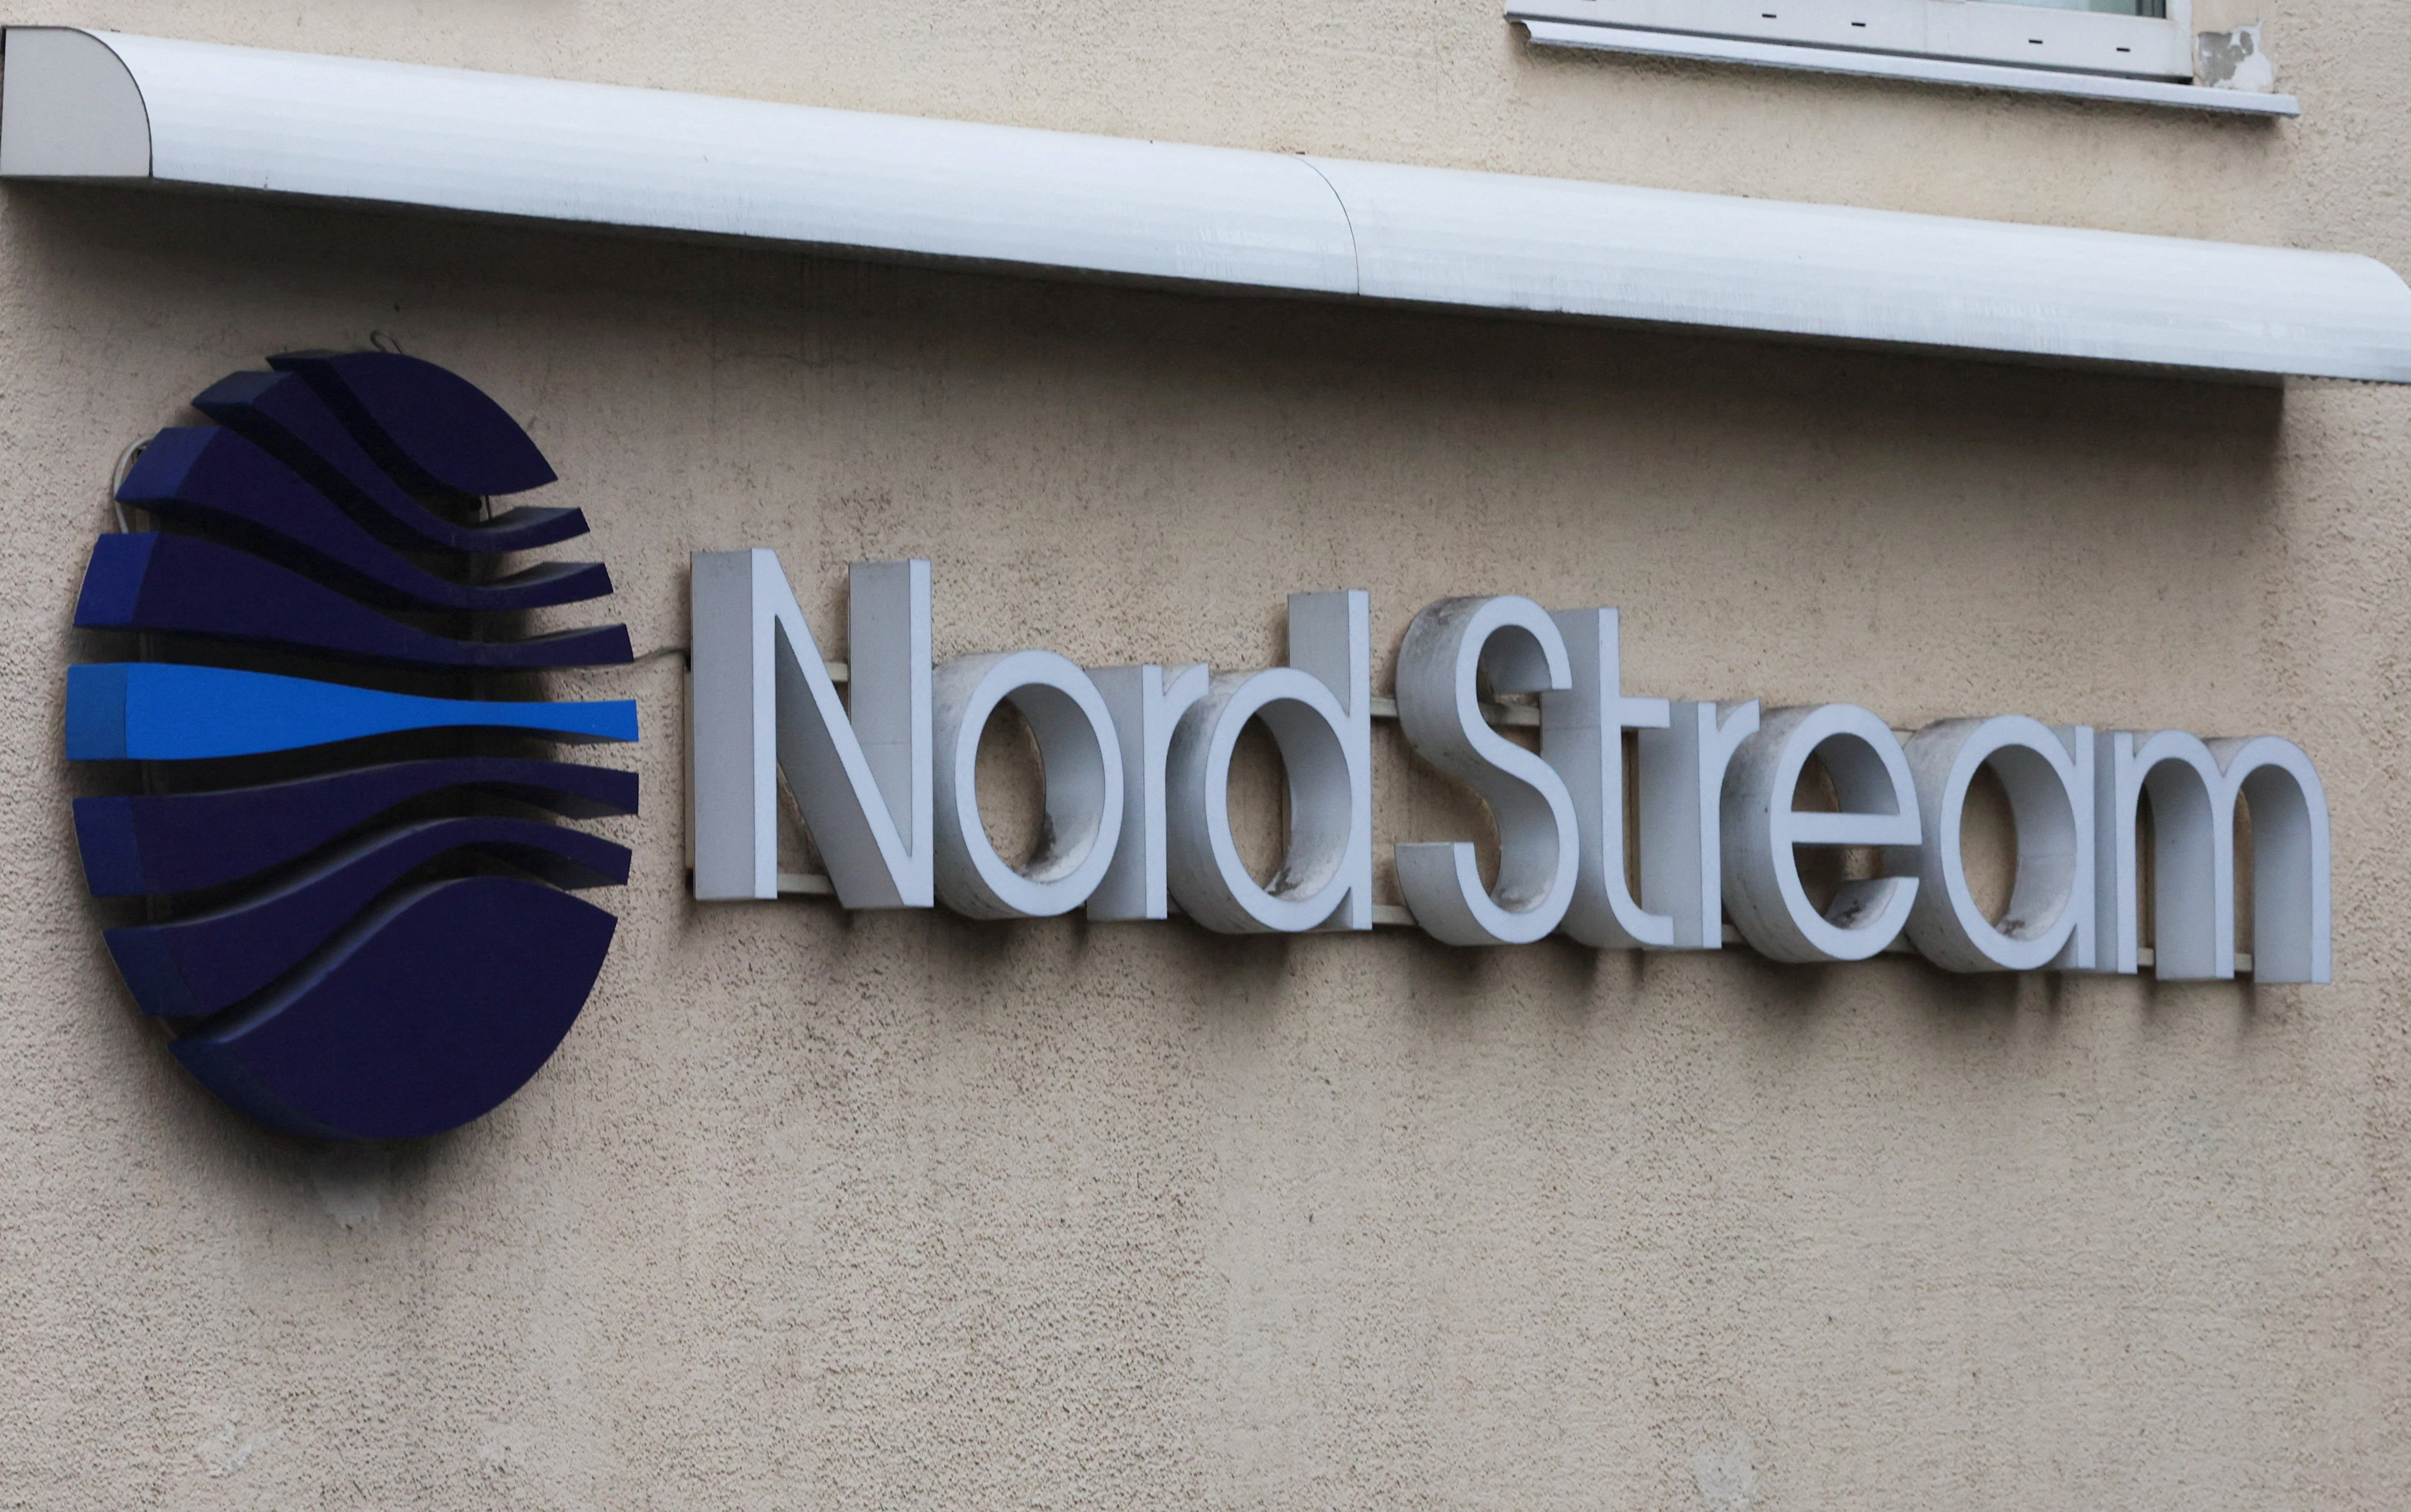 The logo of Nord Stream AG is seen at an office building in Vyborg